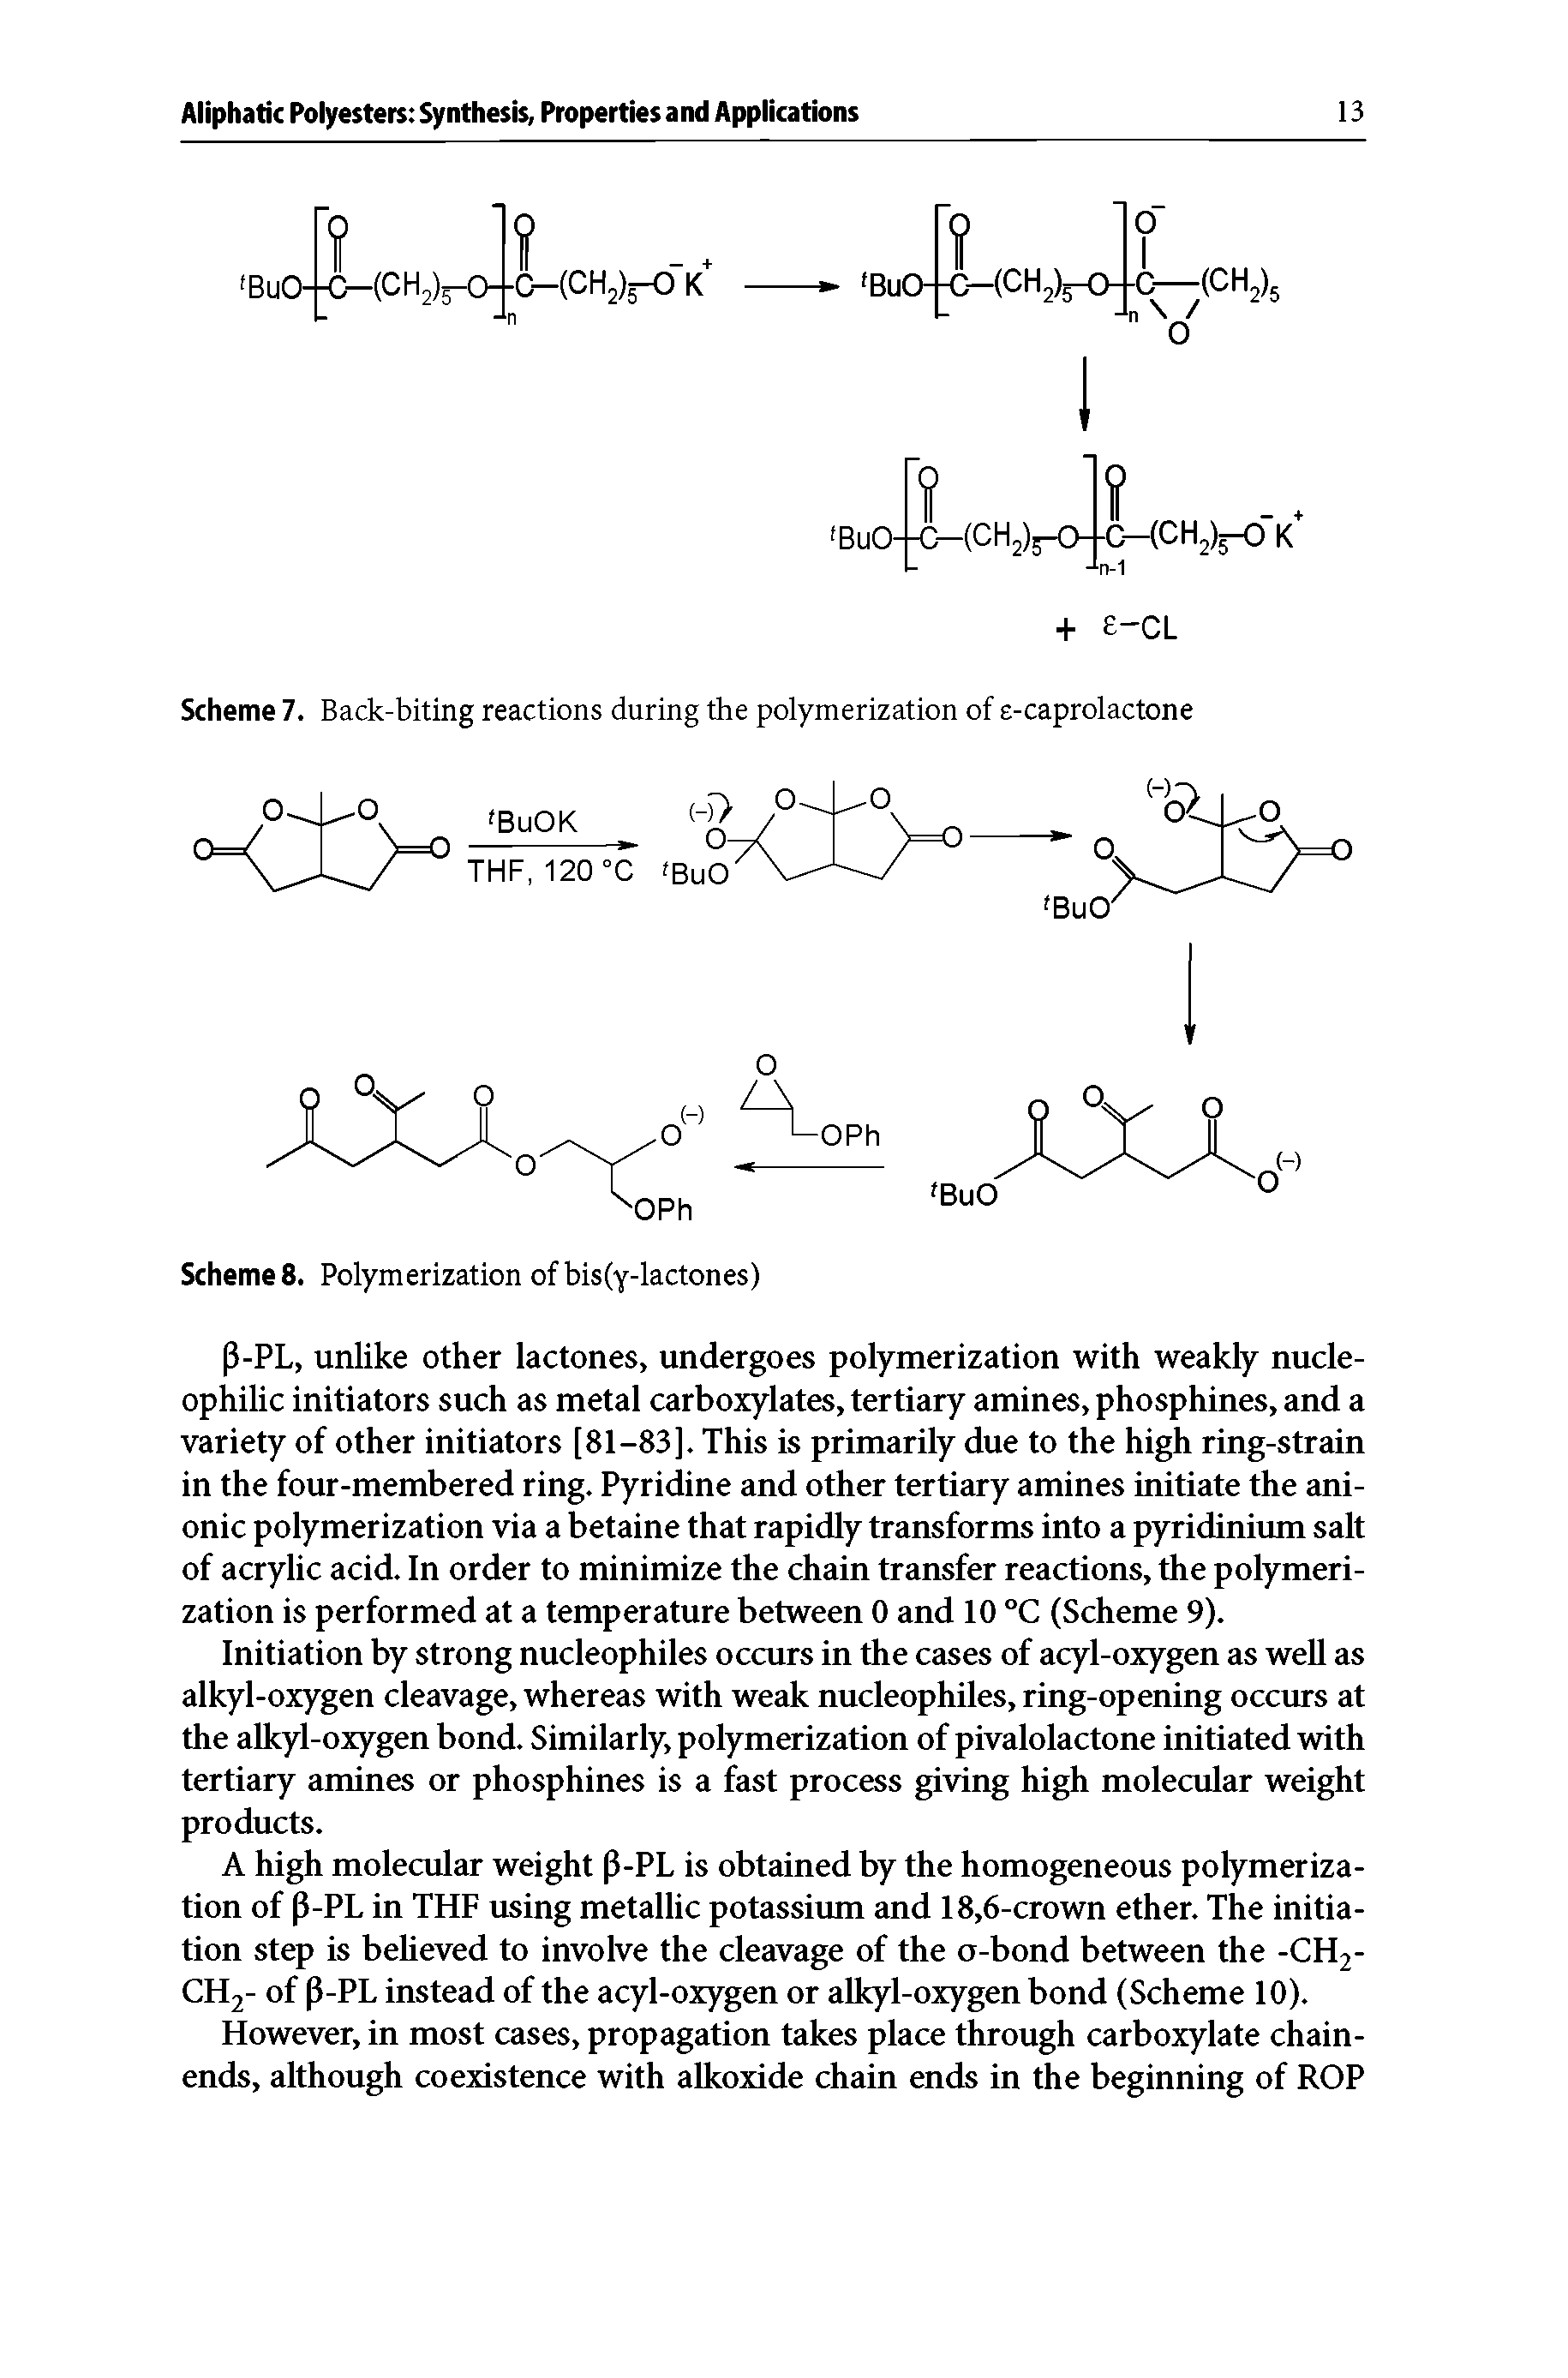 Scheme 7. Back-biting reactions during the polymerization of s-caprolactone...